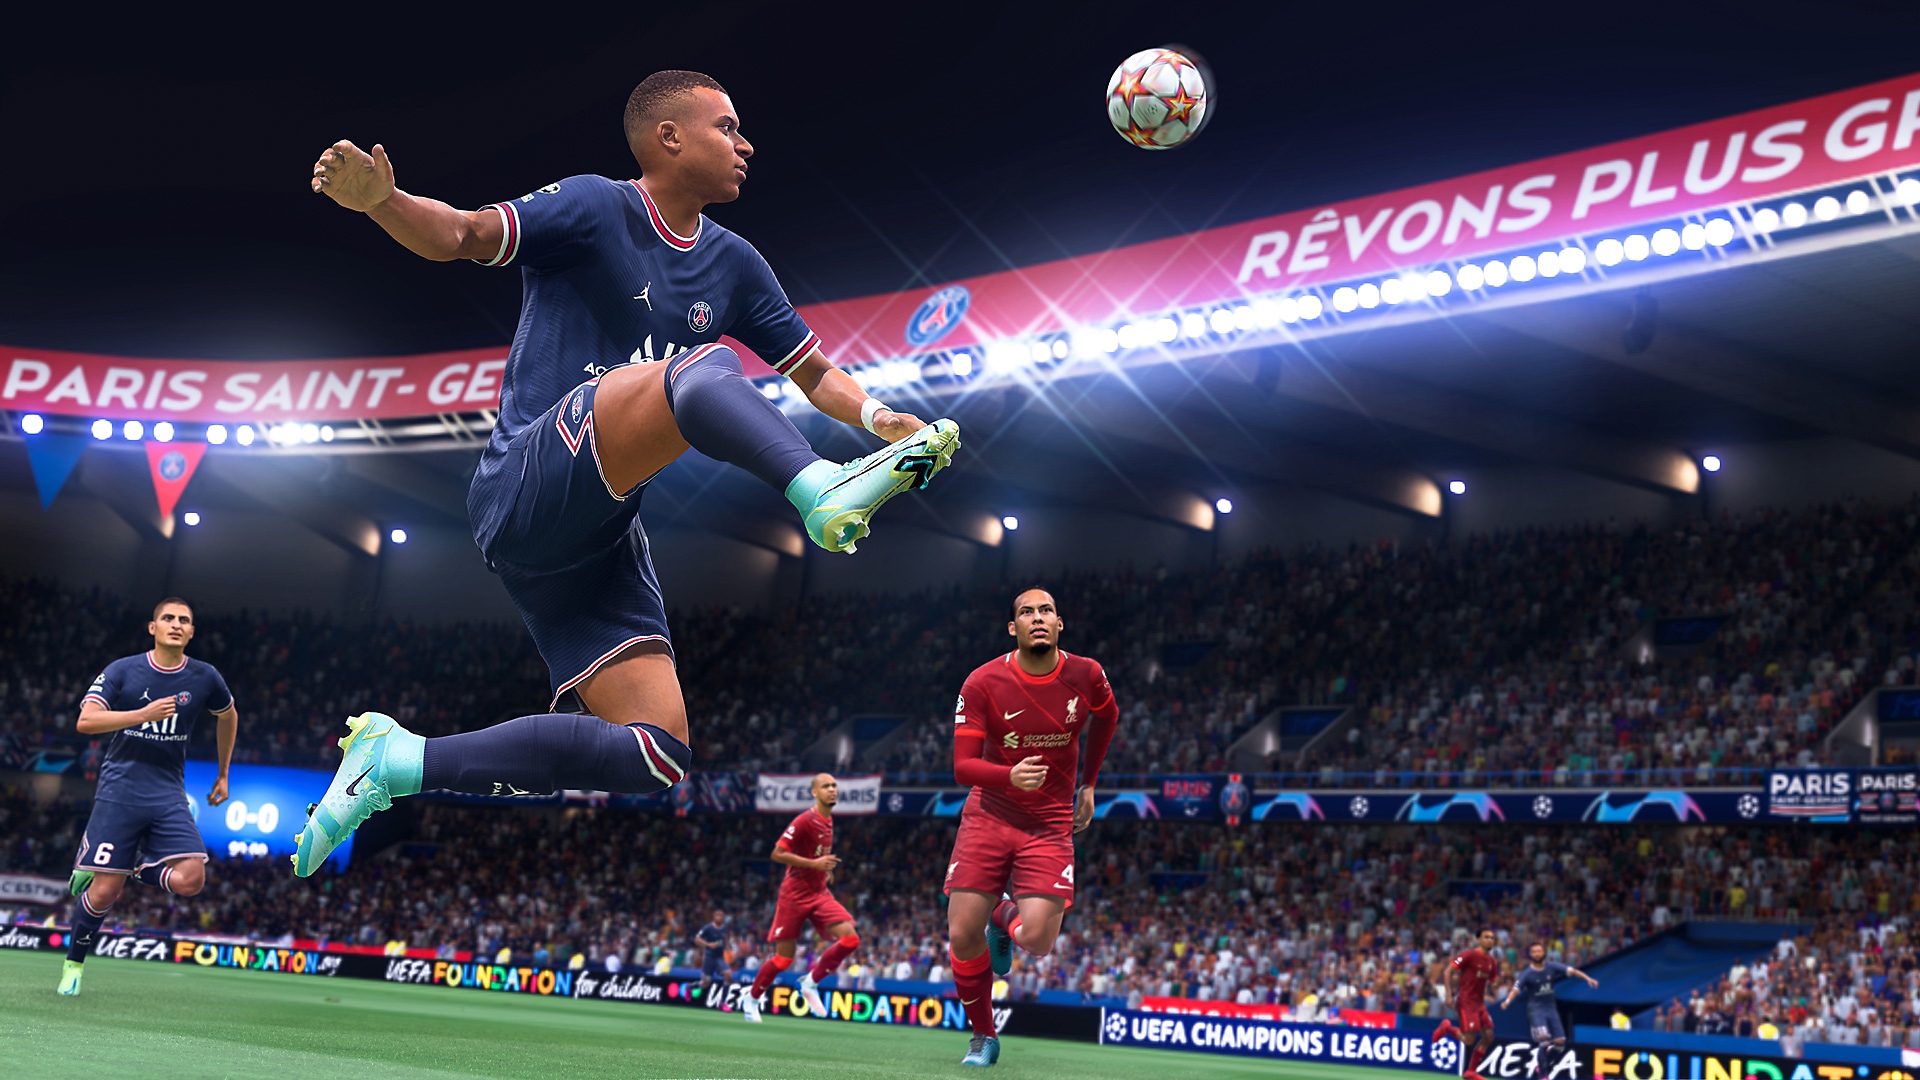 PS5 | PS4《FIFA 22》官方遊戲玩法預告片